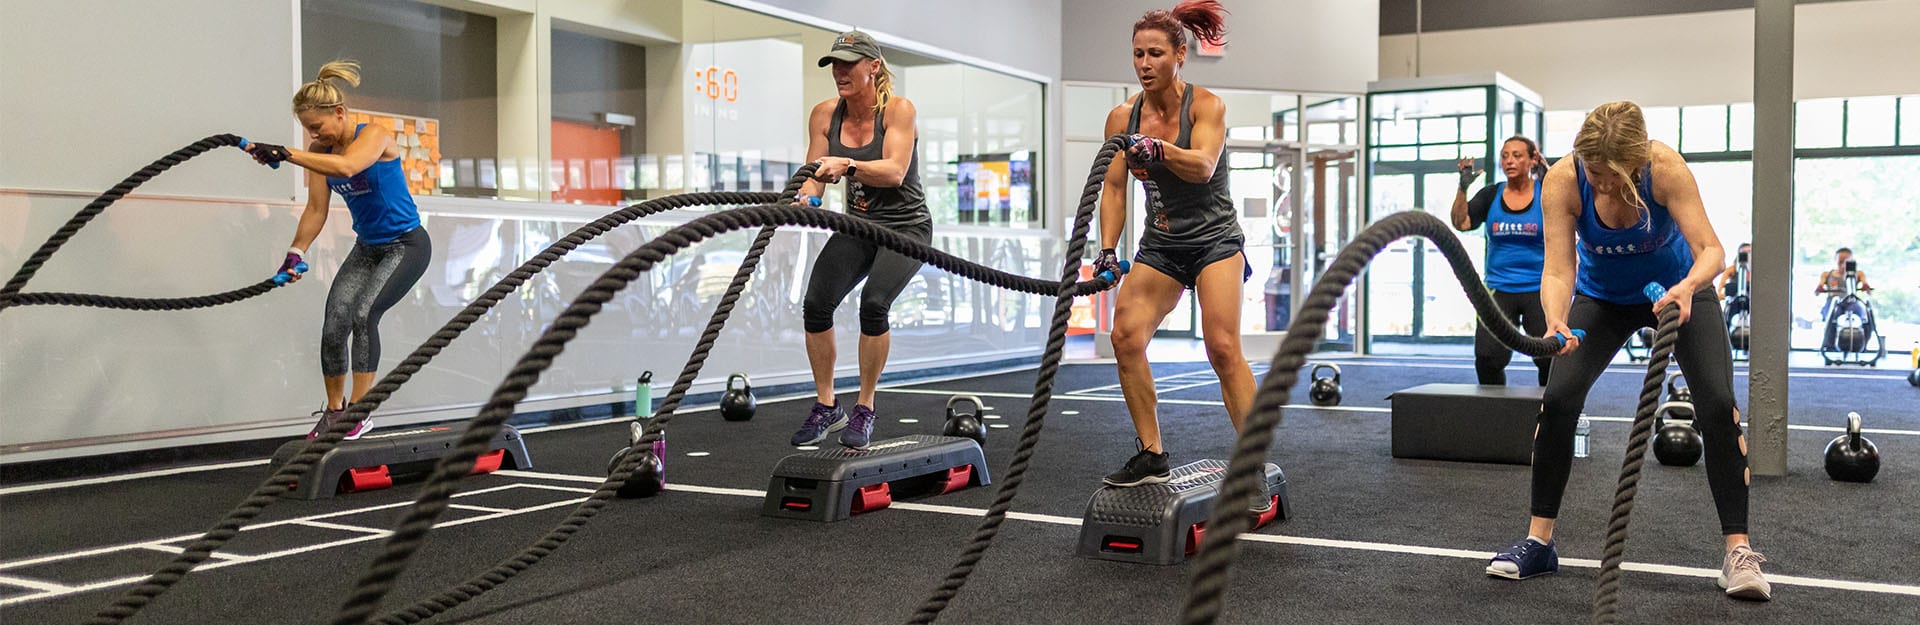 women using combat ropes in workout